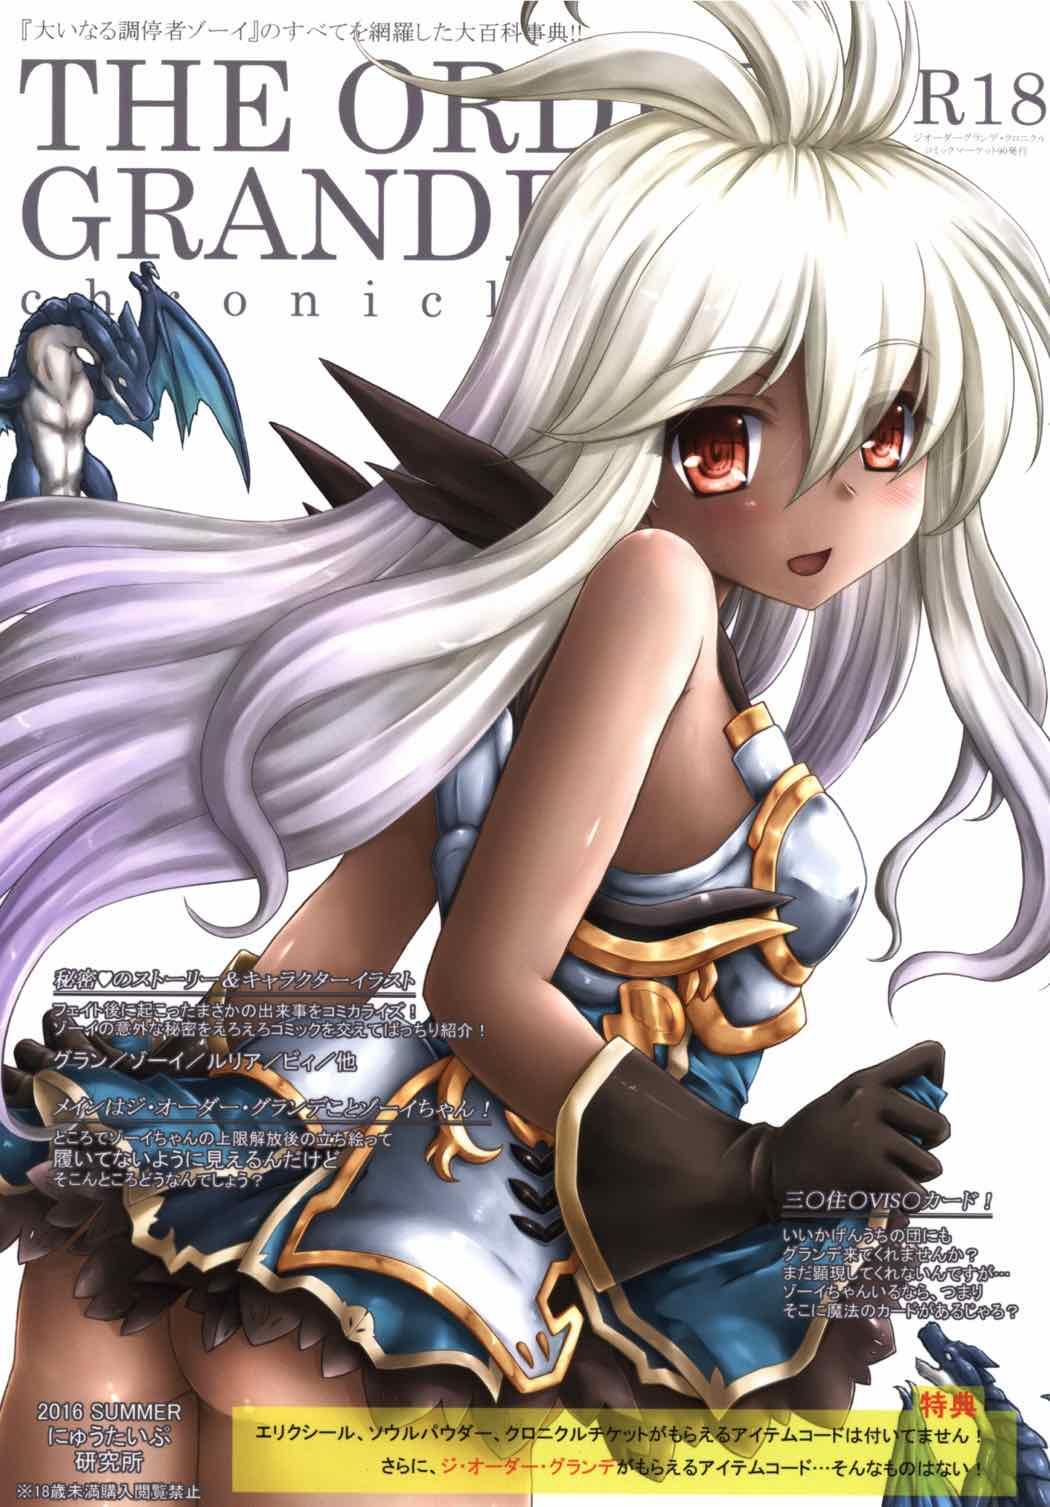 Cunnilingus THE ORDER GRANDE chronicle - Granblue fantasy Mistress - Picture 1